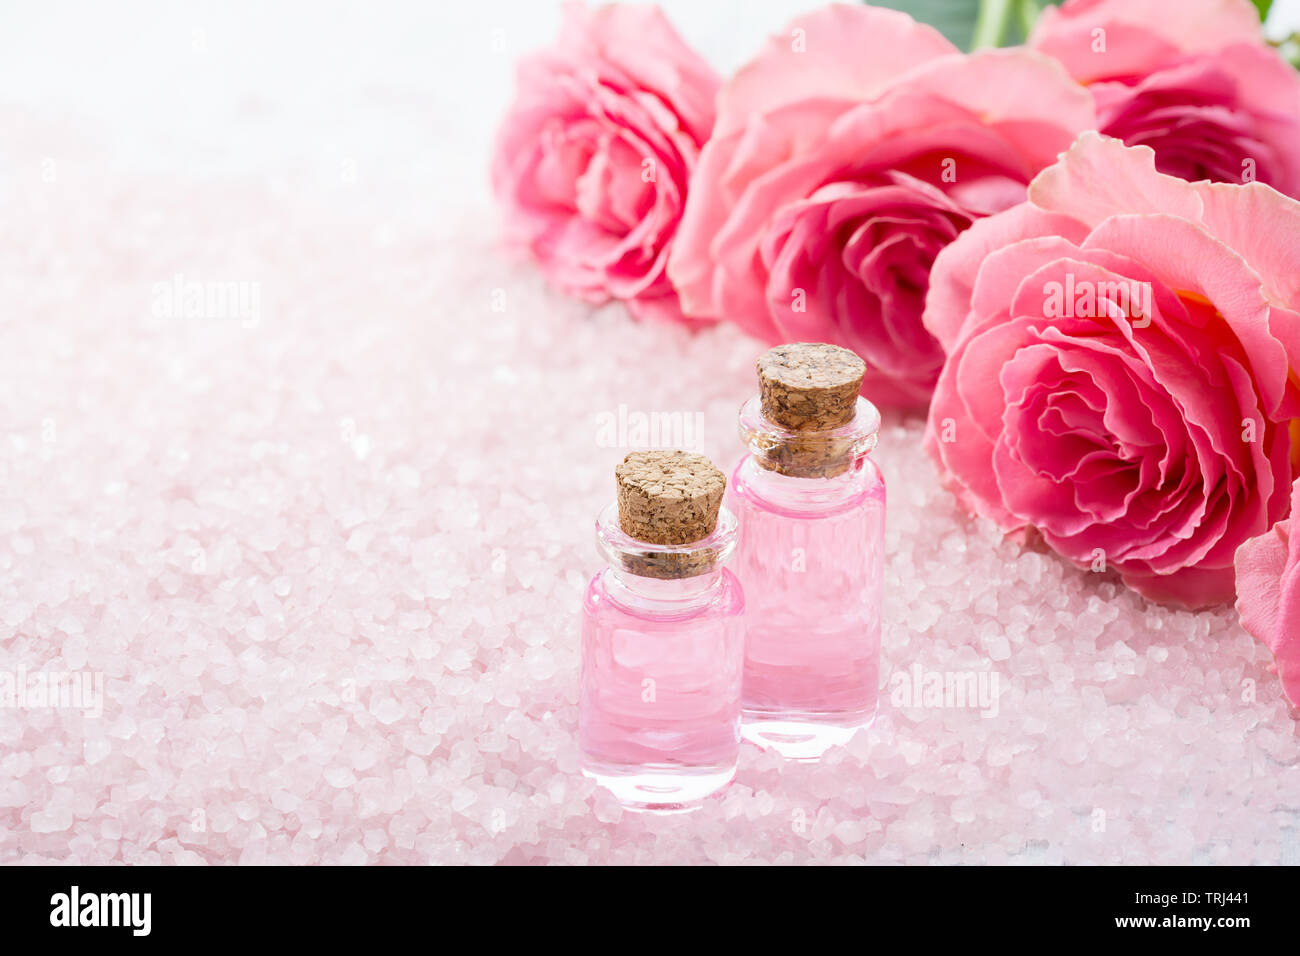 Two bottles with rose oil, spa salt crystals and pink roses. Stock Photo